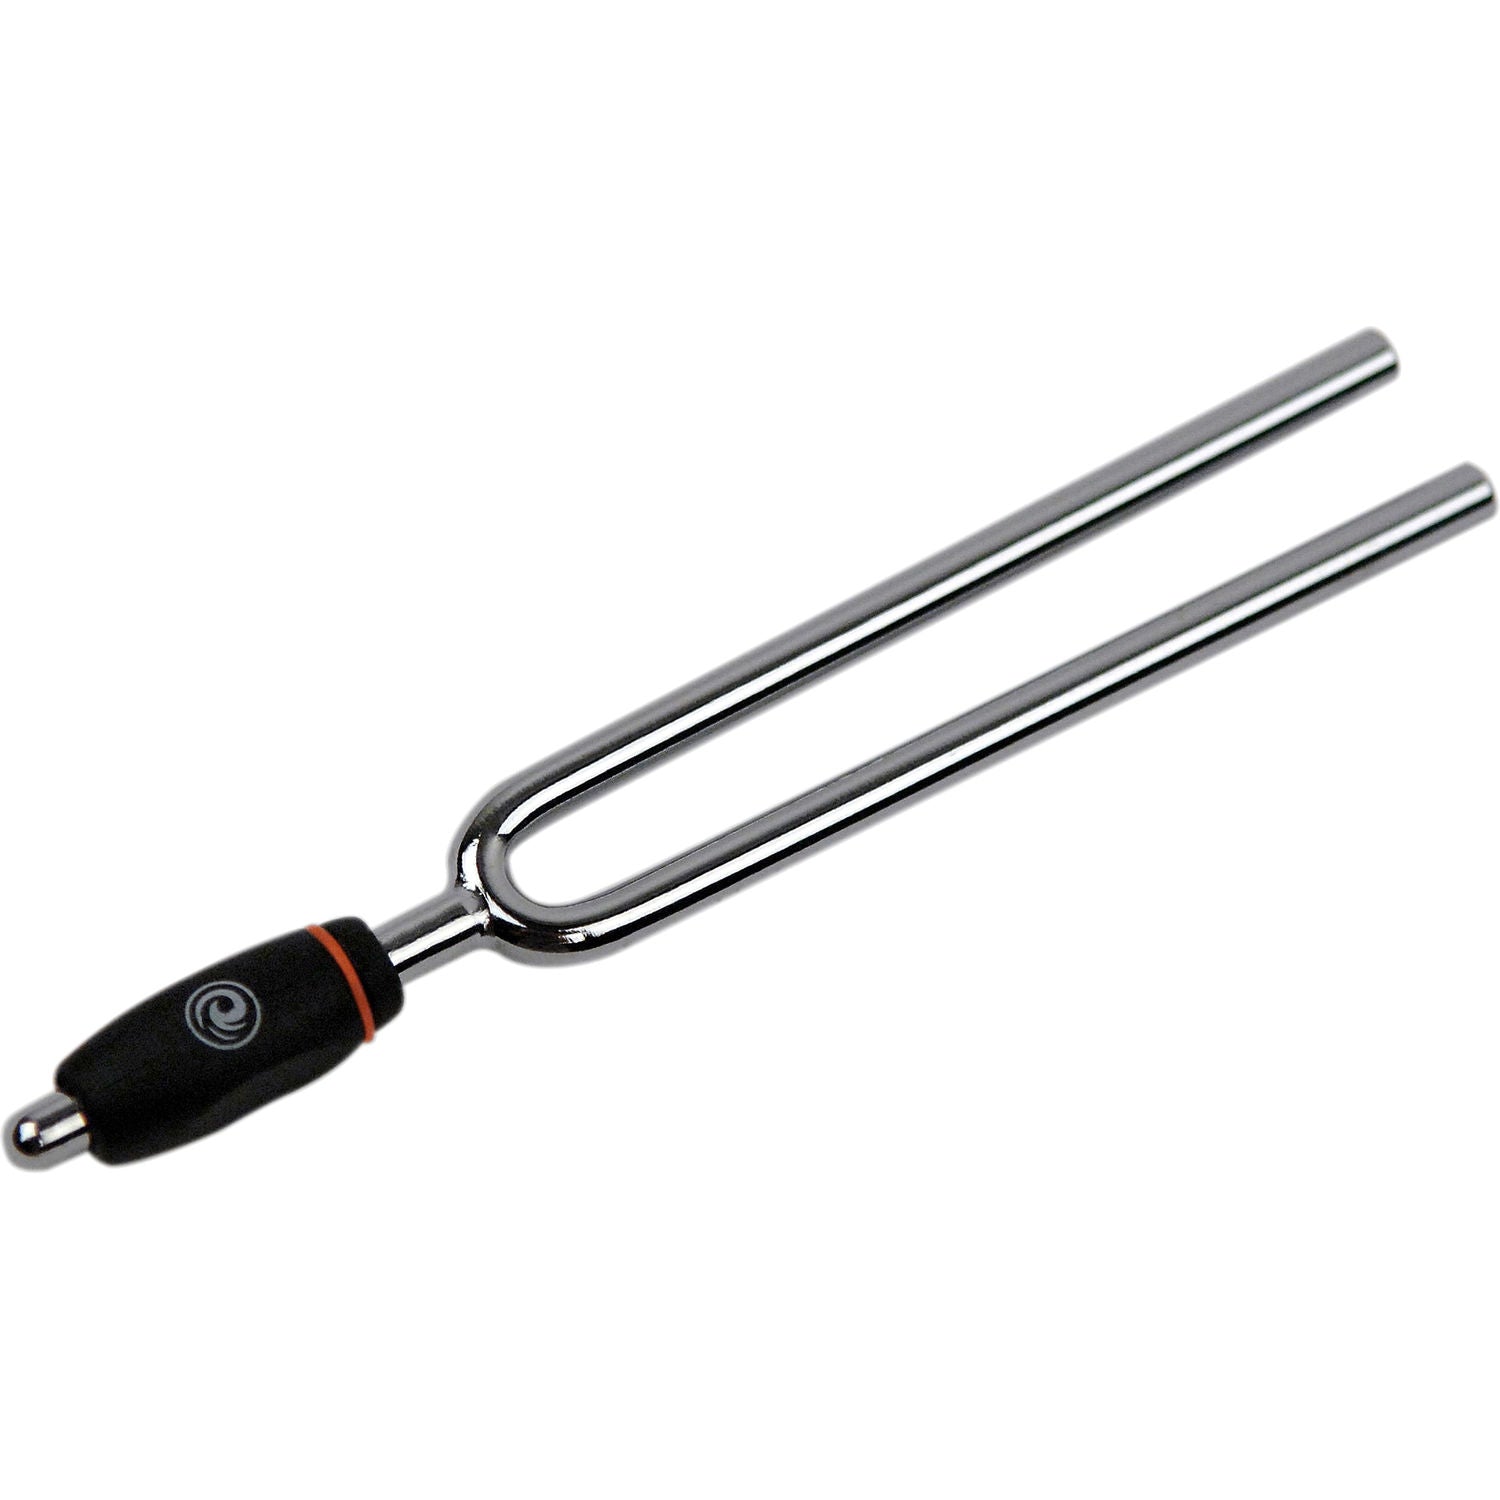 D'Addario Tuning Fork for Key of "A" (440Hz)